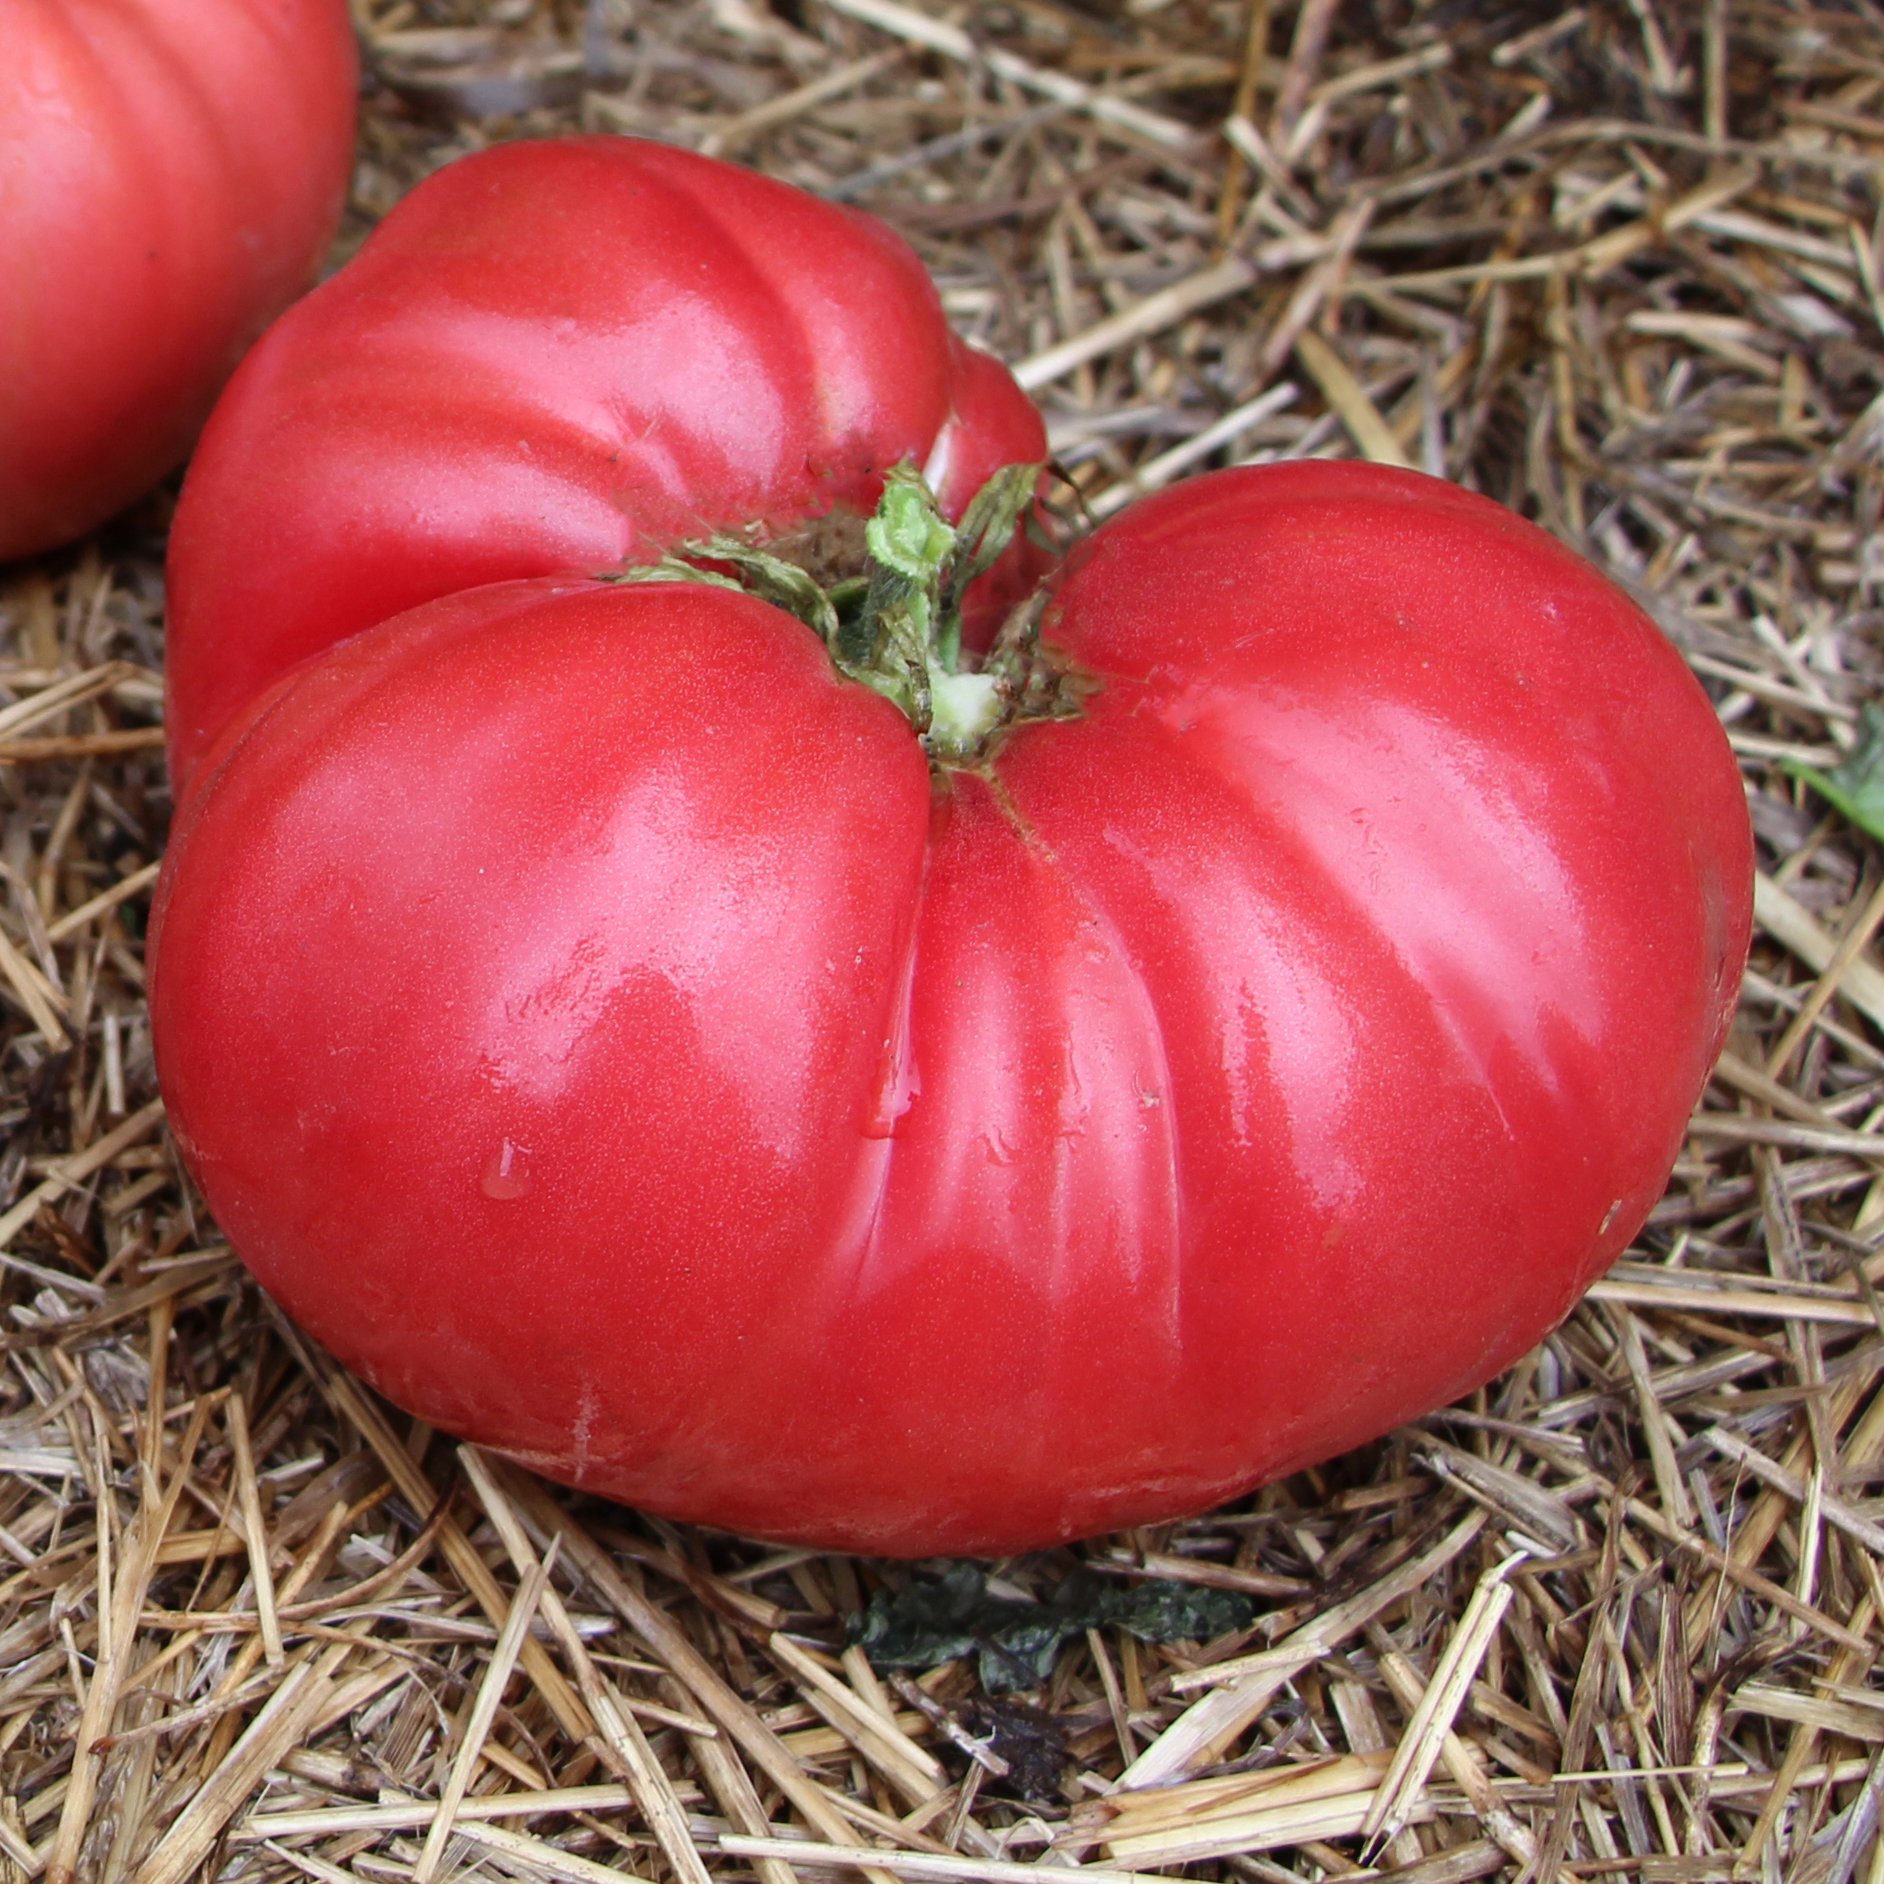 'Council Bluffs Heirloom' tomato